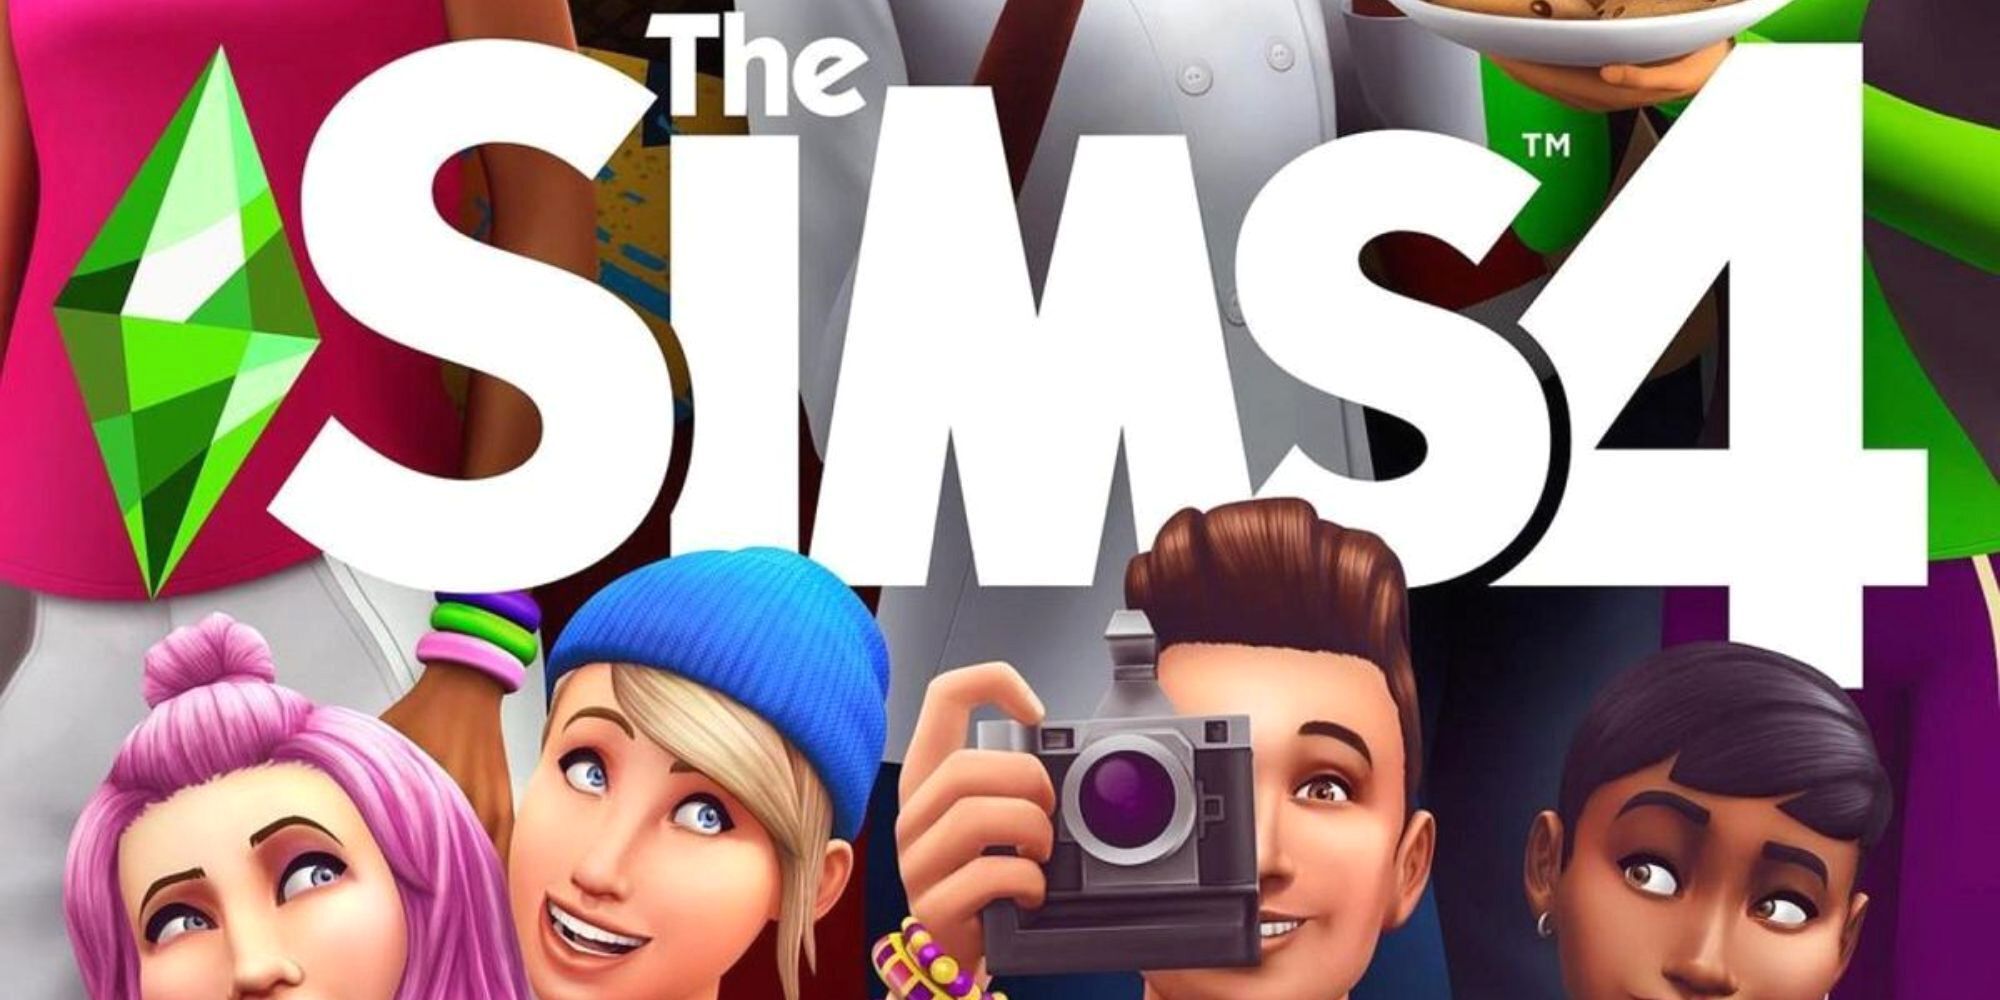 The Sims 4 Title Screen